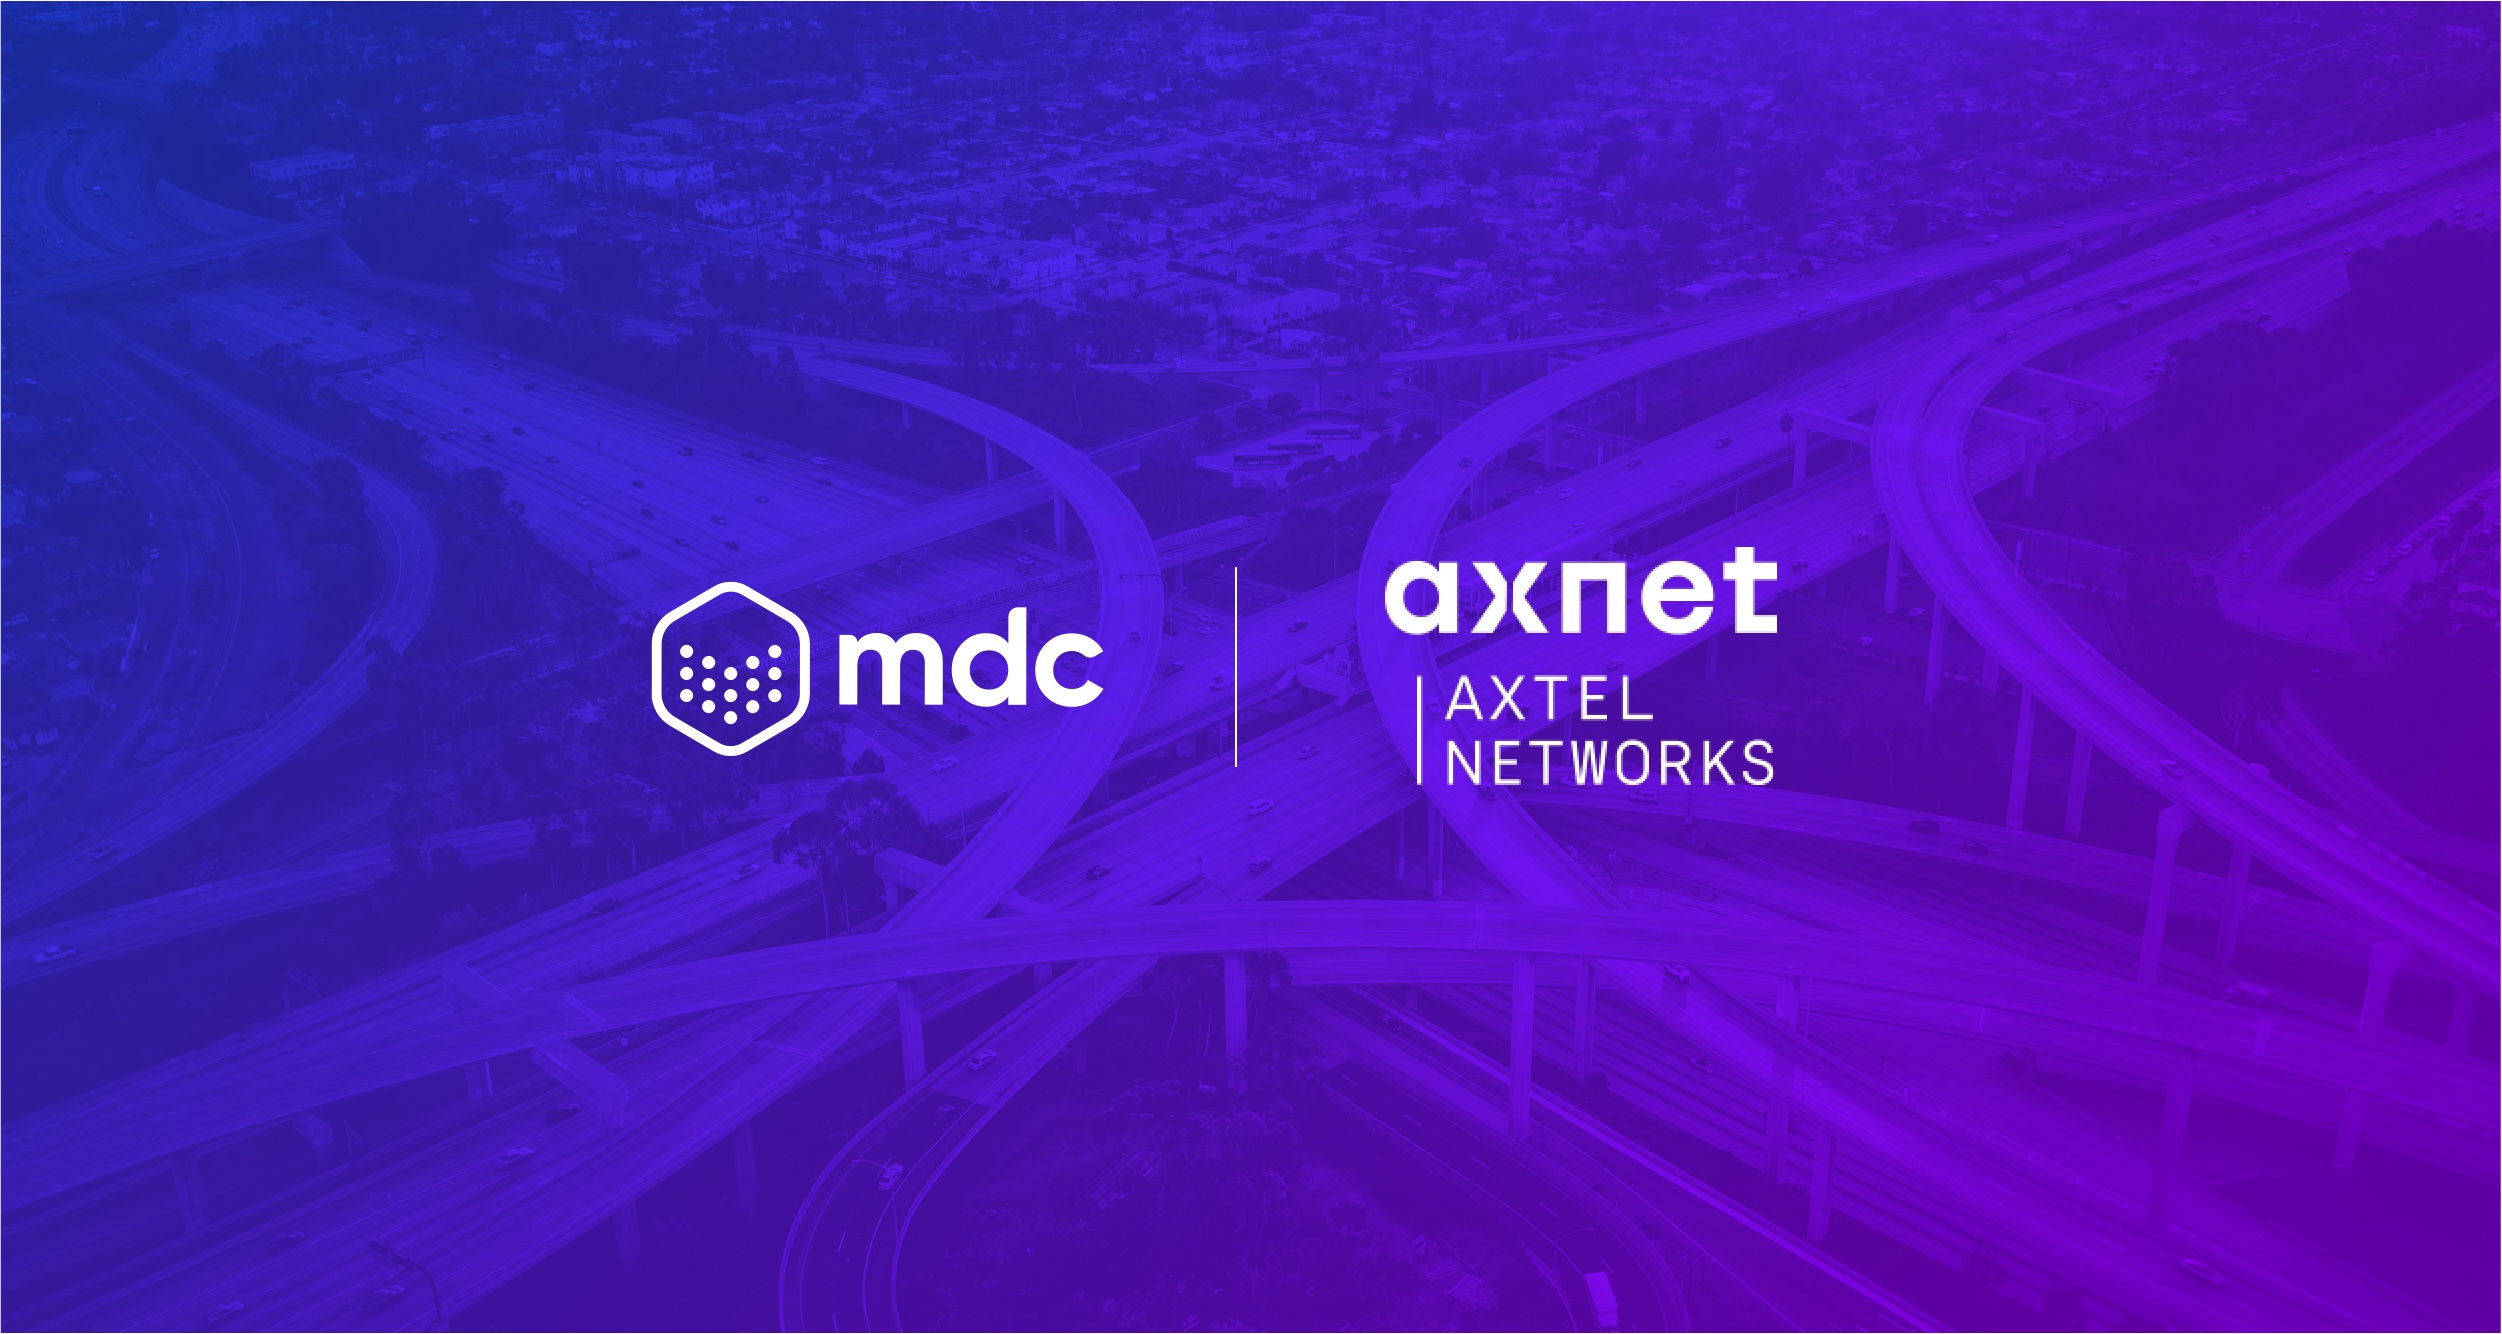 Axnet partners with MDC to extend network coverage from Mexico to major hubs in the US